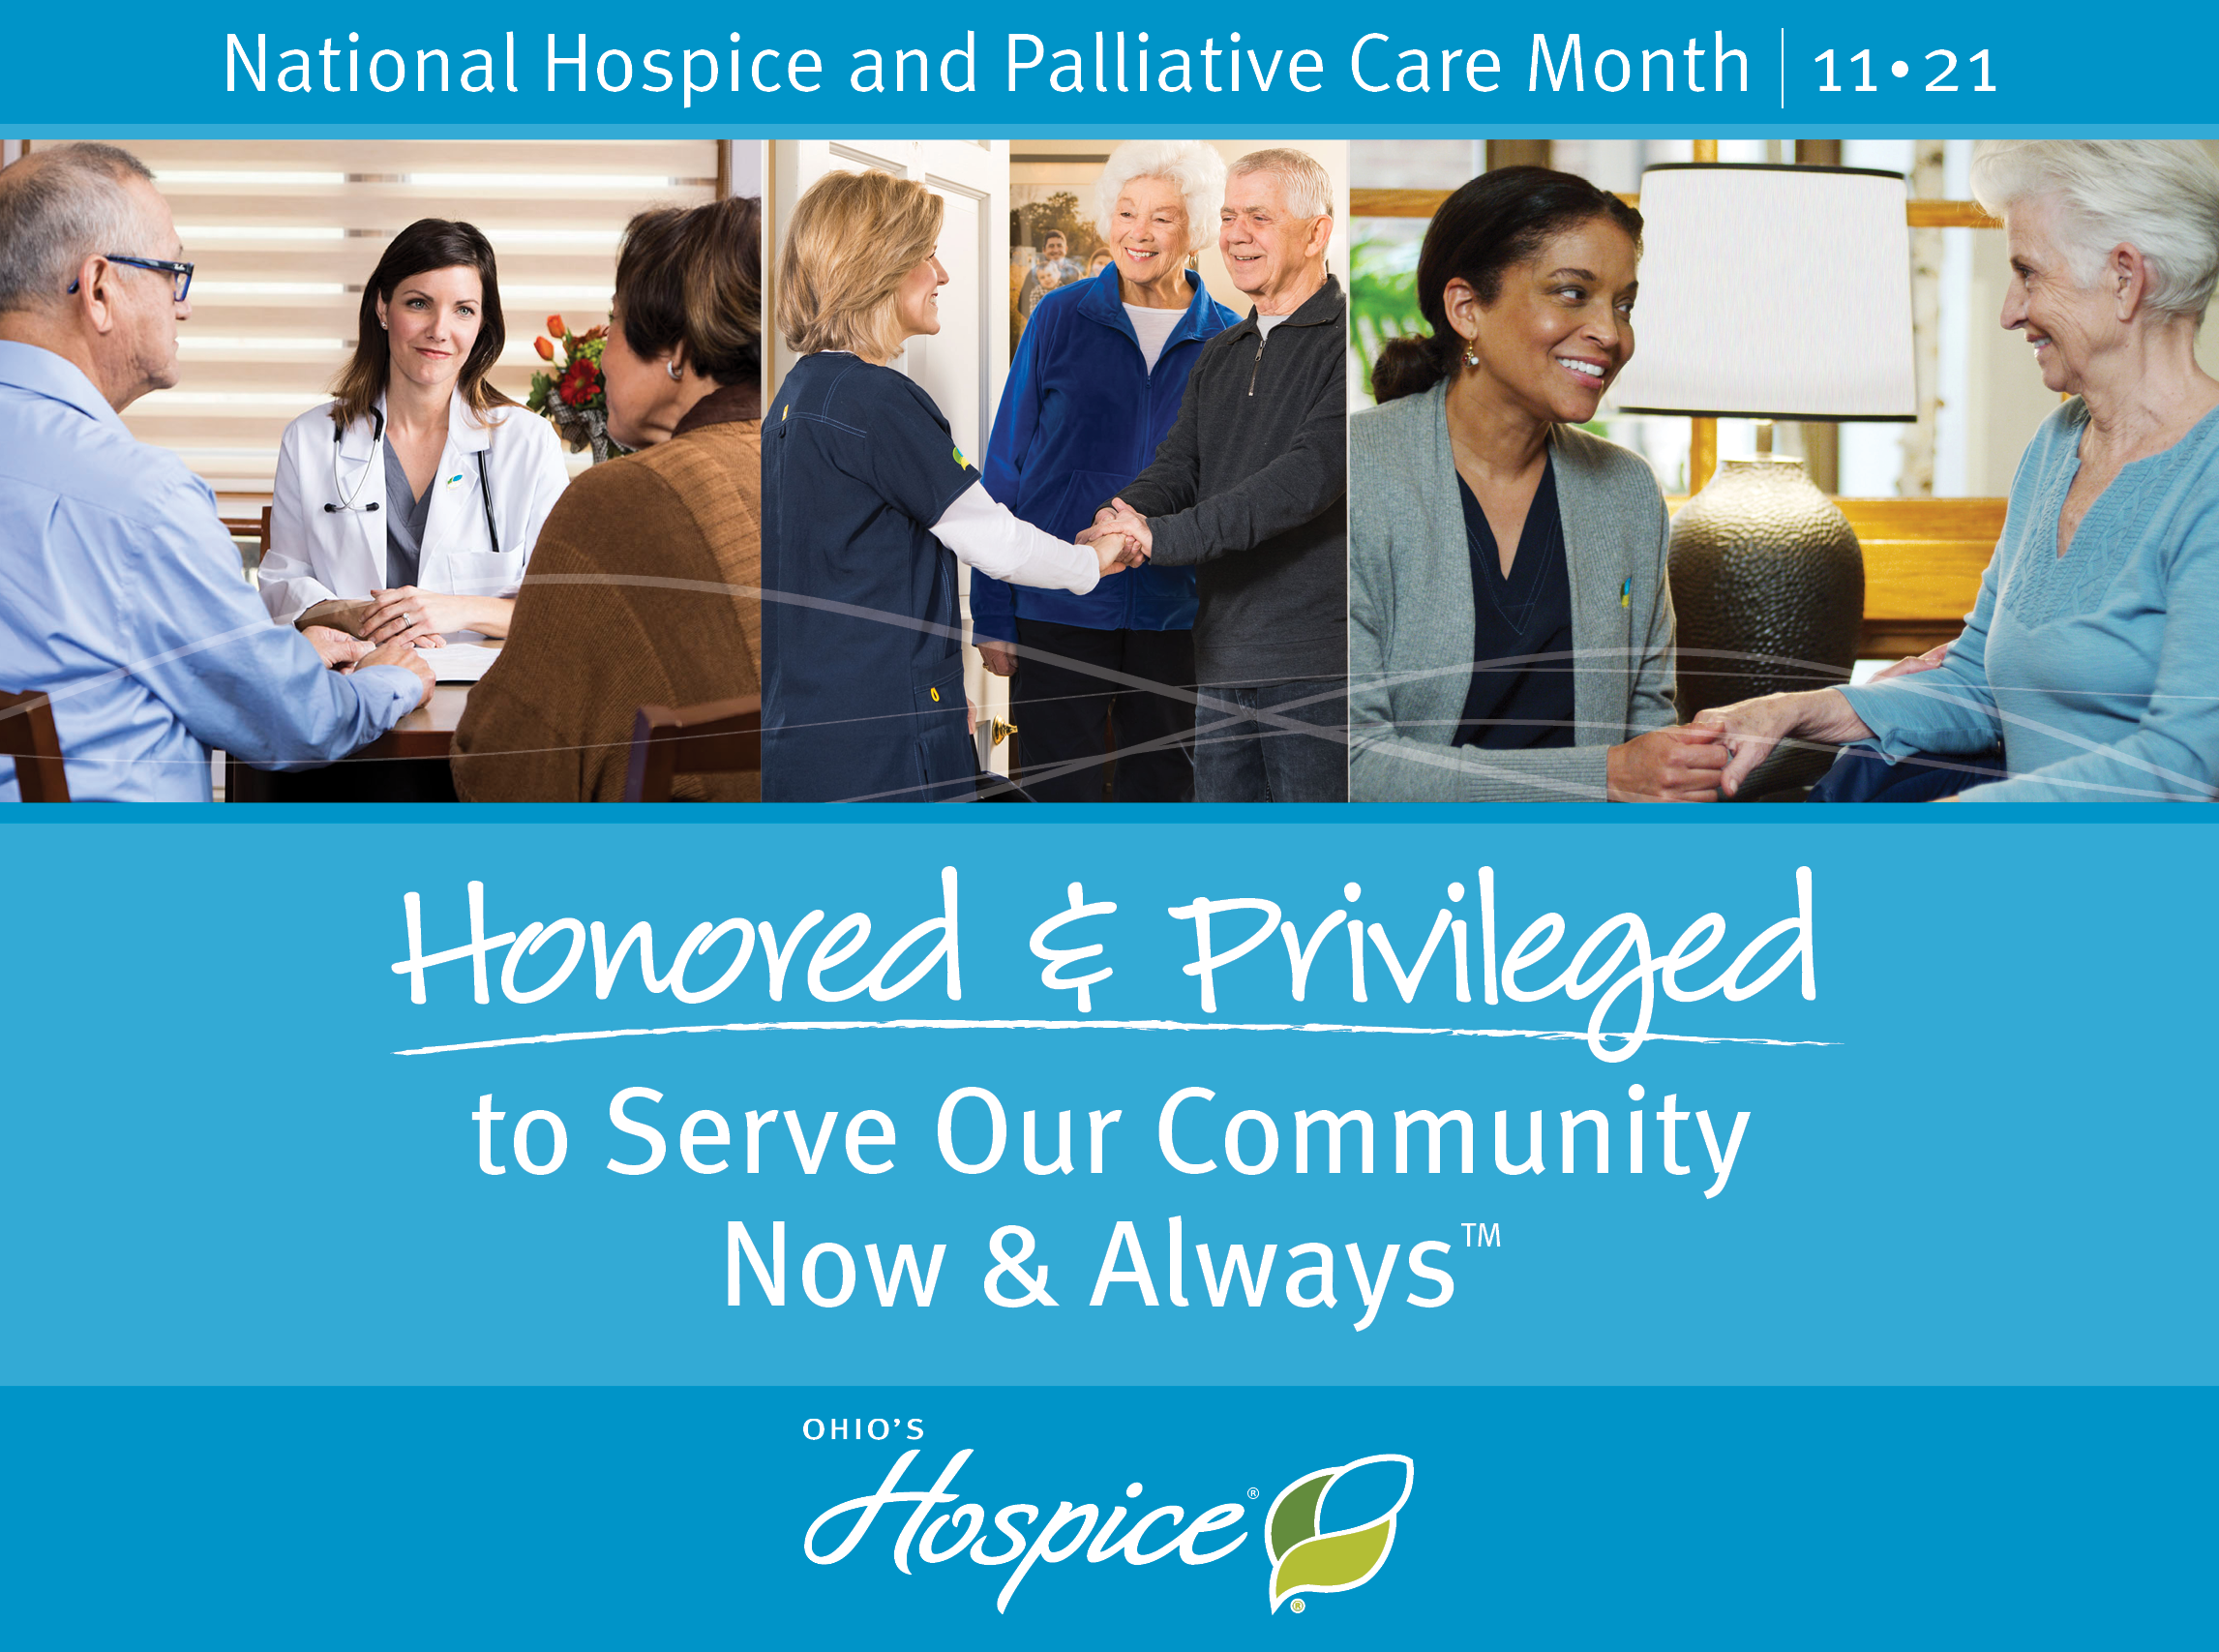 National Hospice and Palliative Care Month 11-2021